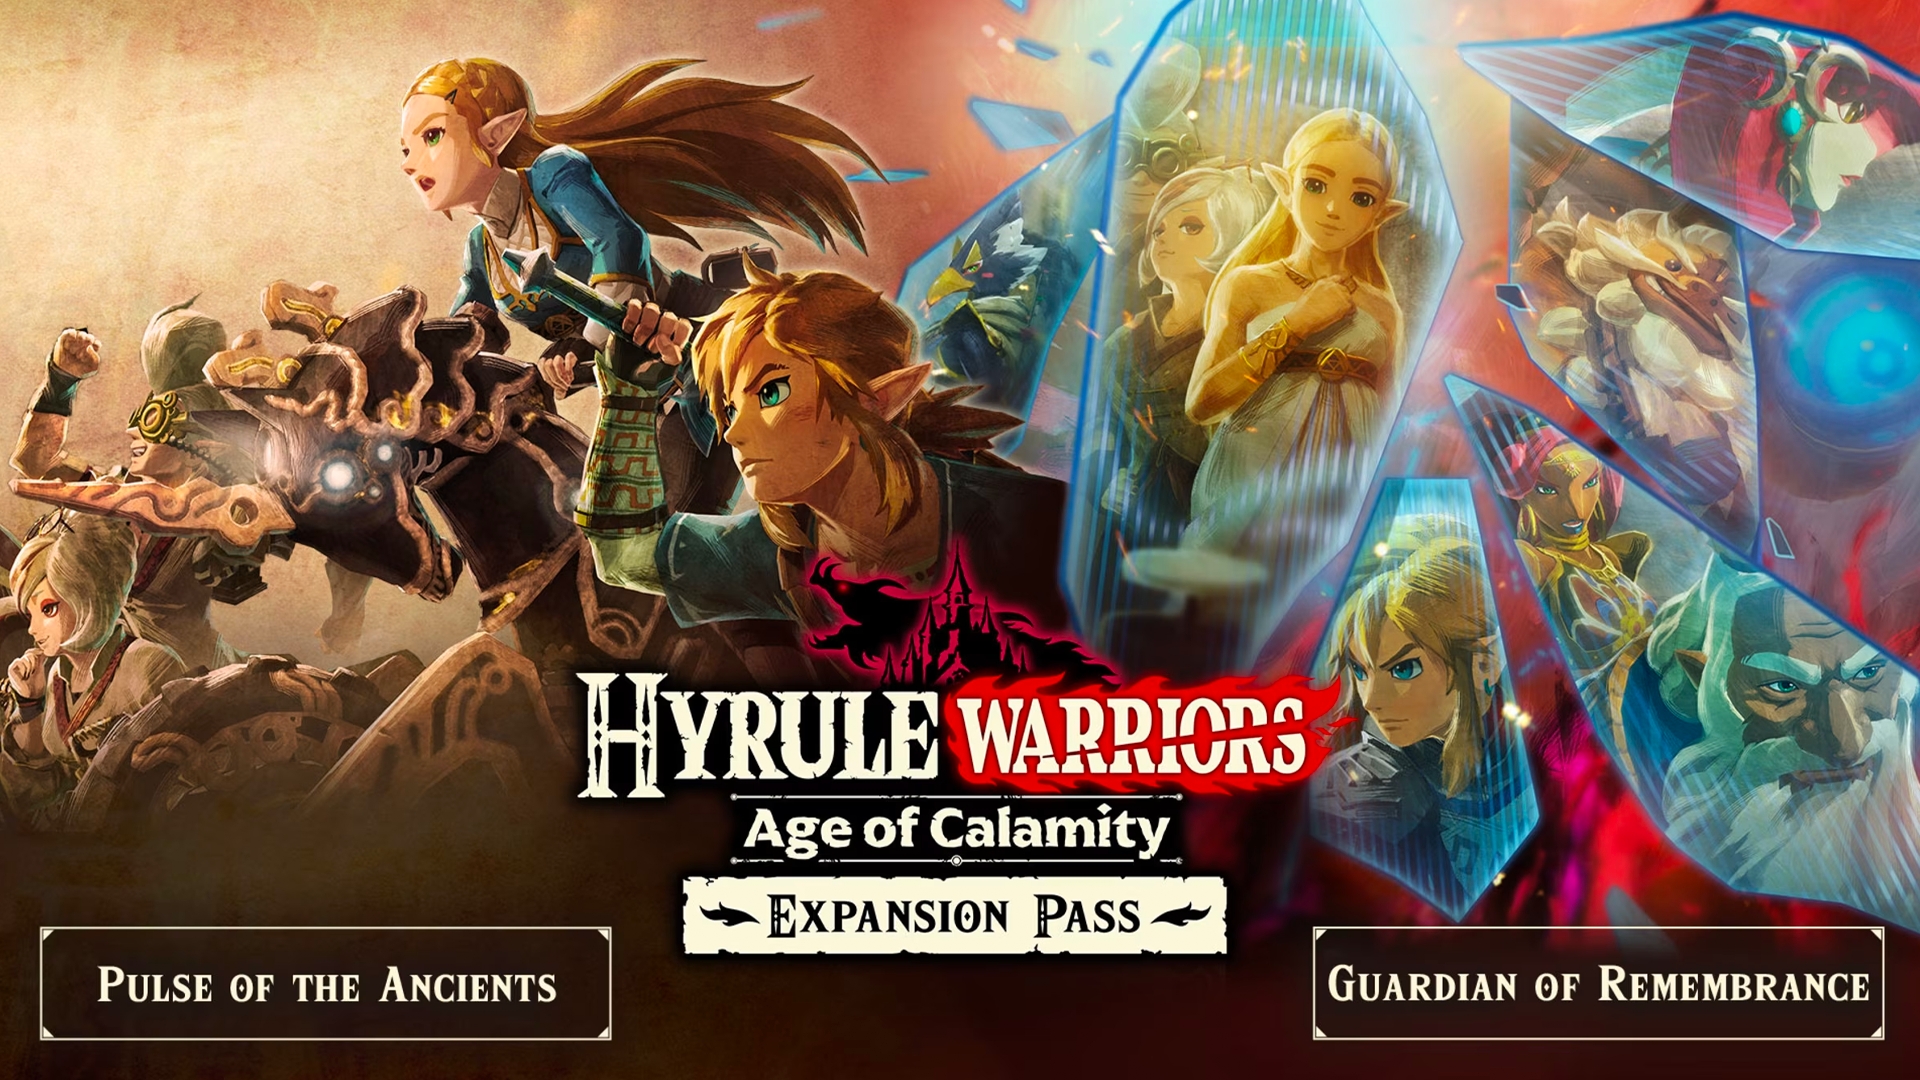 Buy Hyrule Warriors Age of Eshop Switch Expansion Calamity Pass Nintendo